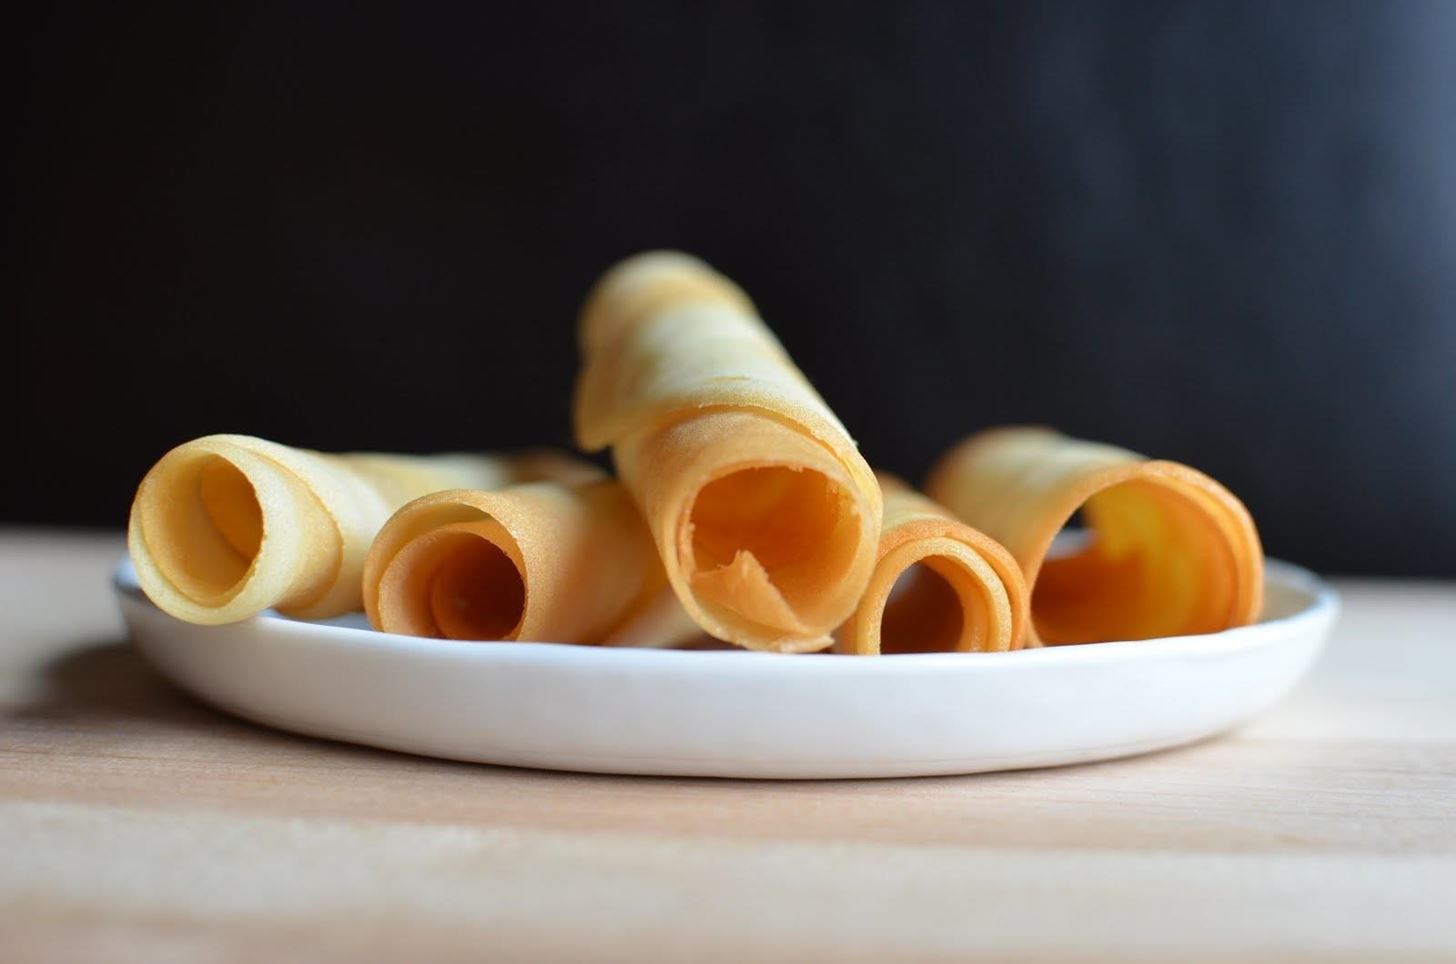 Tuiles: The Coolest Food You're Not Using (Make Them in Only 10 Minutes!)